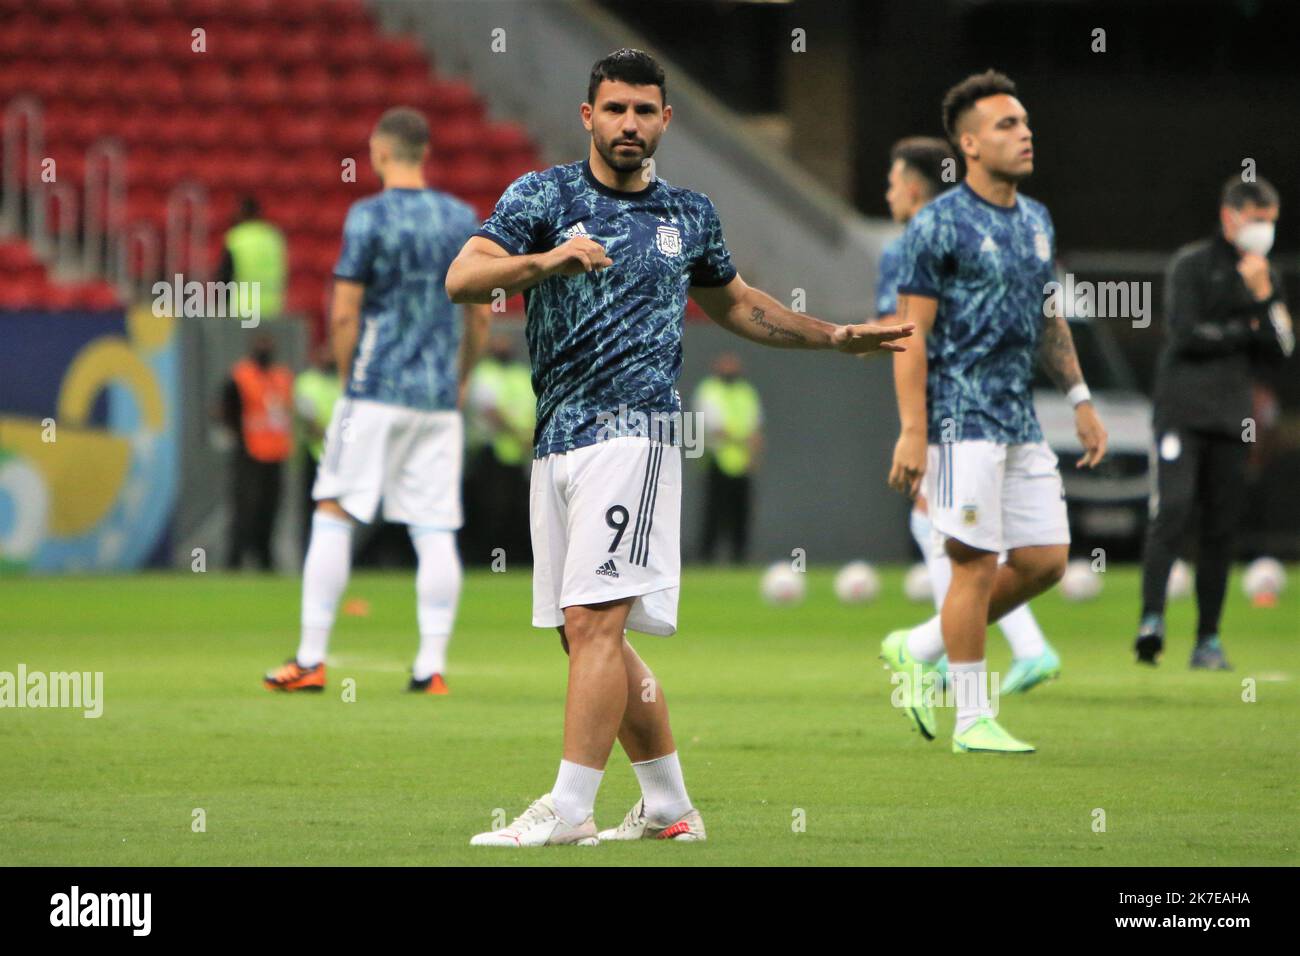 ©Laurent Lairys/MAXPPP - Sergio Aguero of Argentina during the Copa America 2021, semi-final football match between Argentina and Colombia on July 6, 2021 at Estádio Nacional Mané Garrincha in Brasilia, Brazil photos Laurent Lairys /MAXPPP Stock Photo